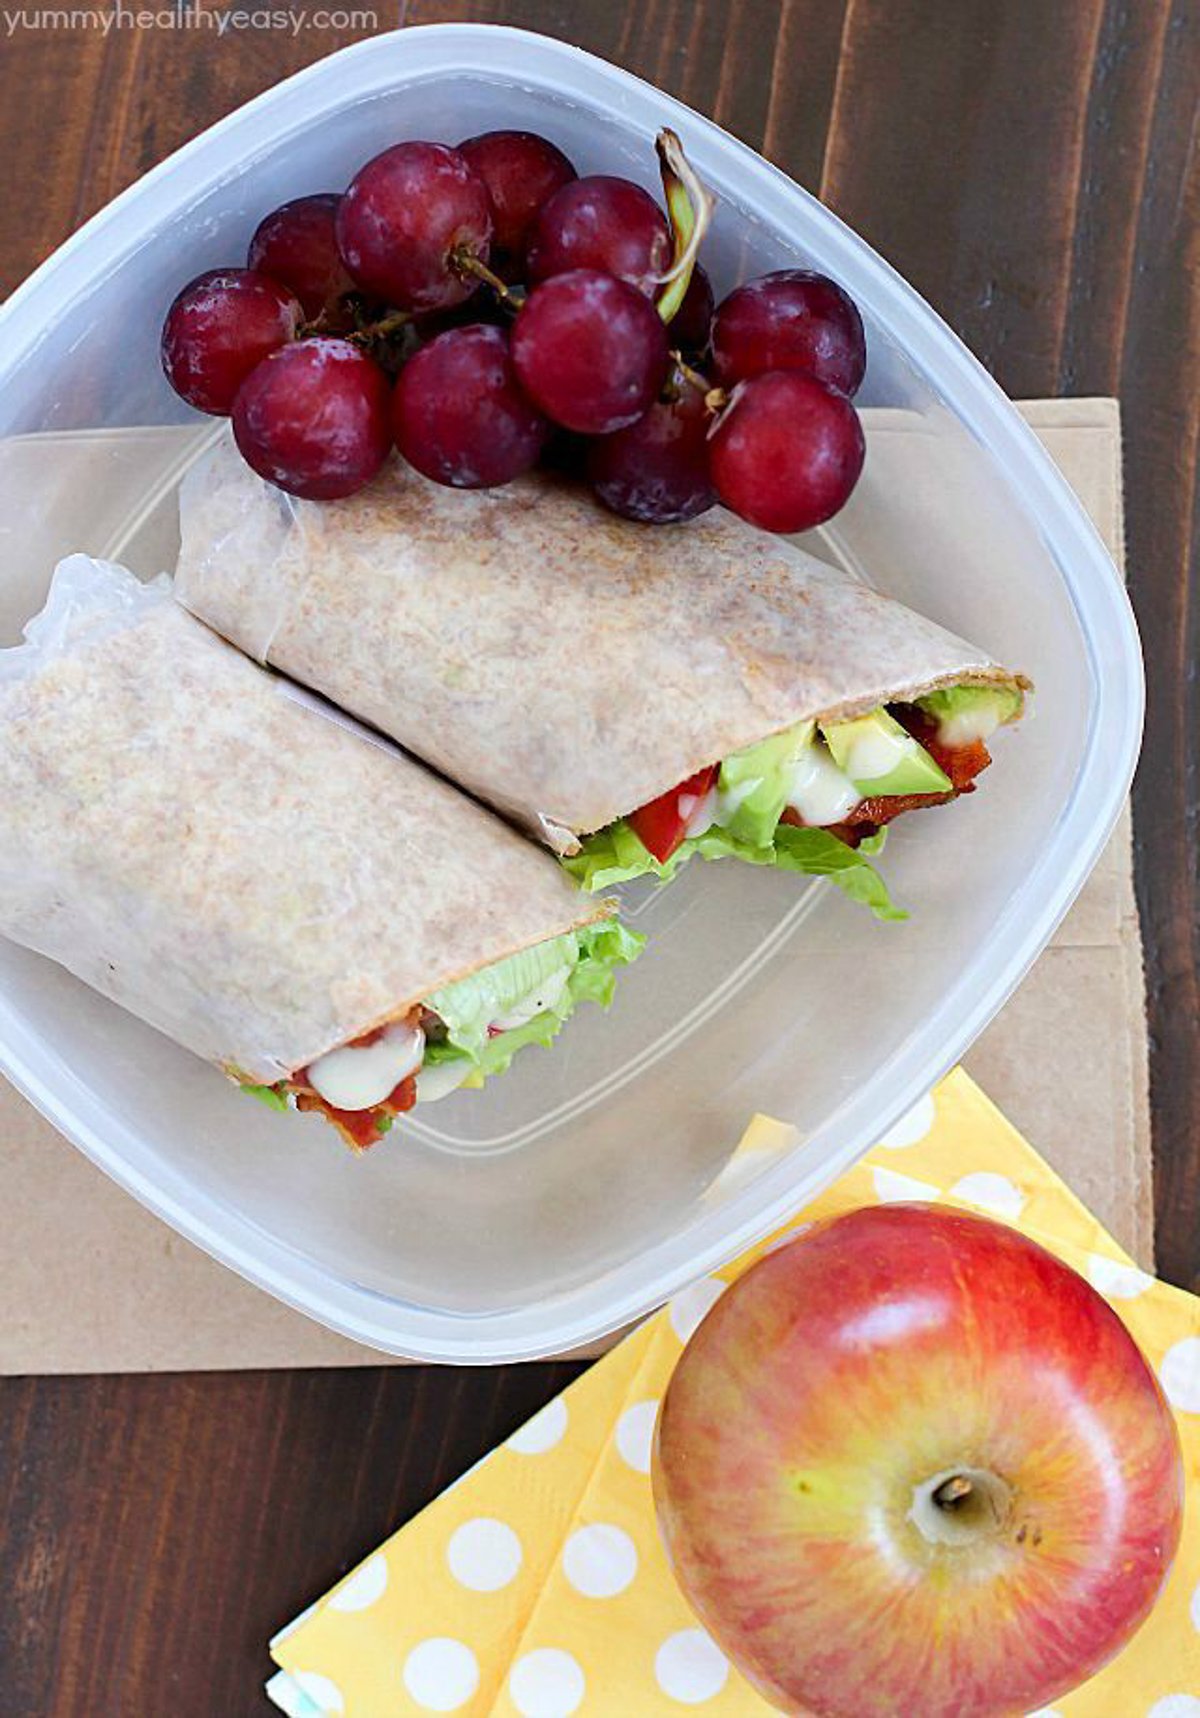 16 Make-Ahead Cold Lunch Ideas to Prep for Work This Week - Try prepping these awesome cold lunch ideas instead of reheating! - ProjectMealPlan.com